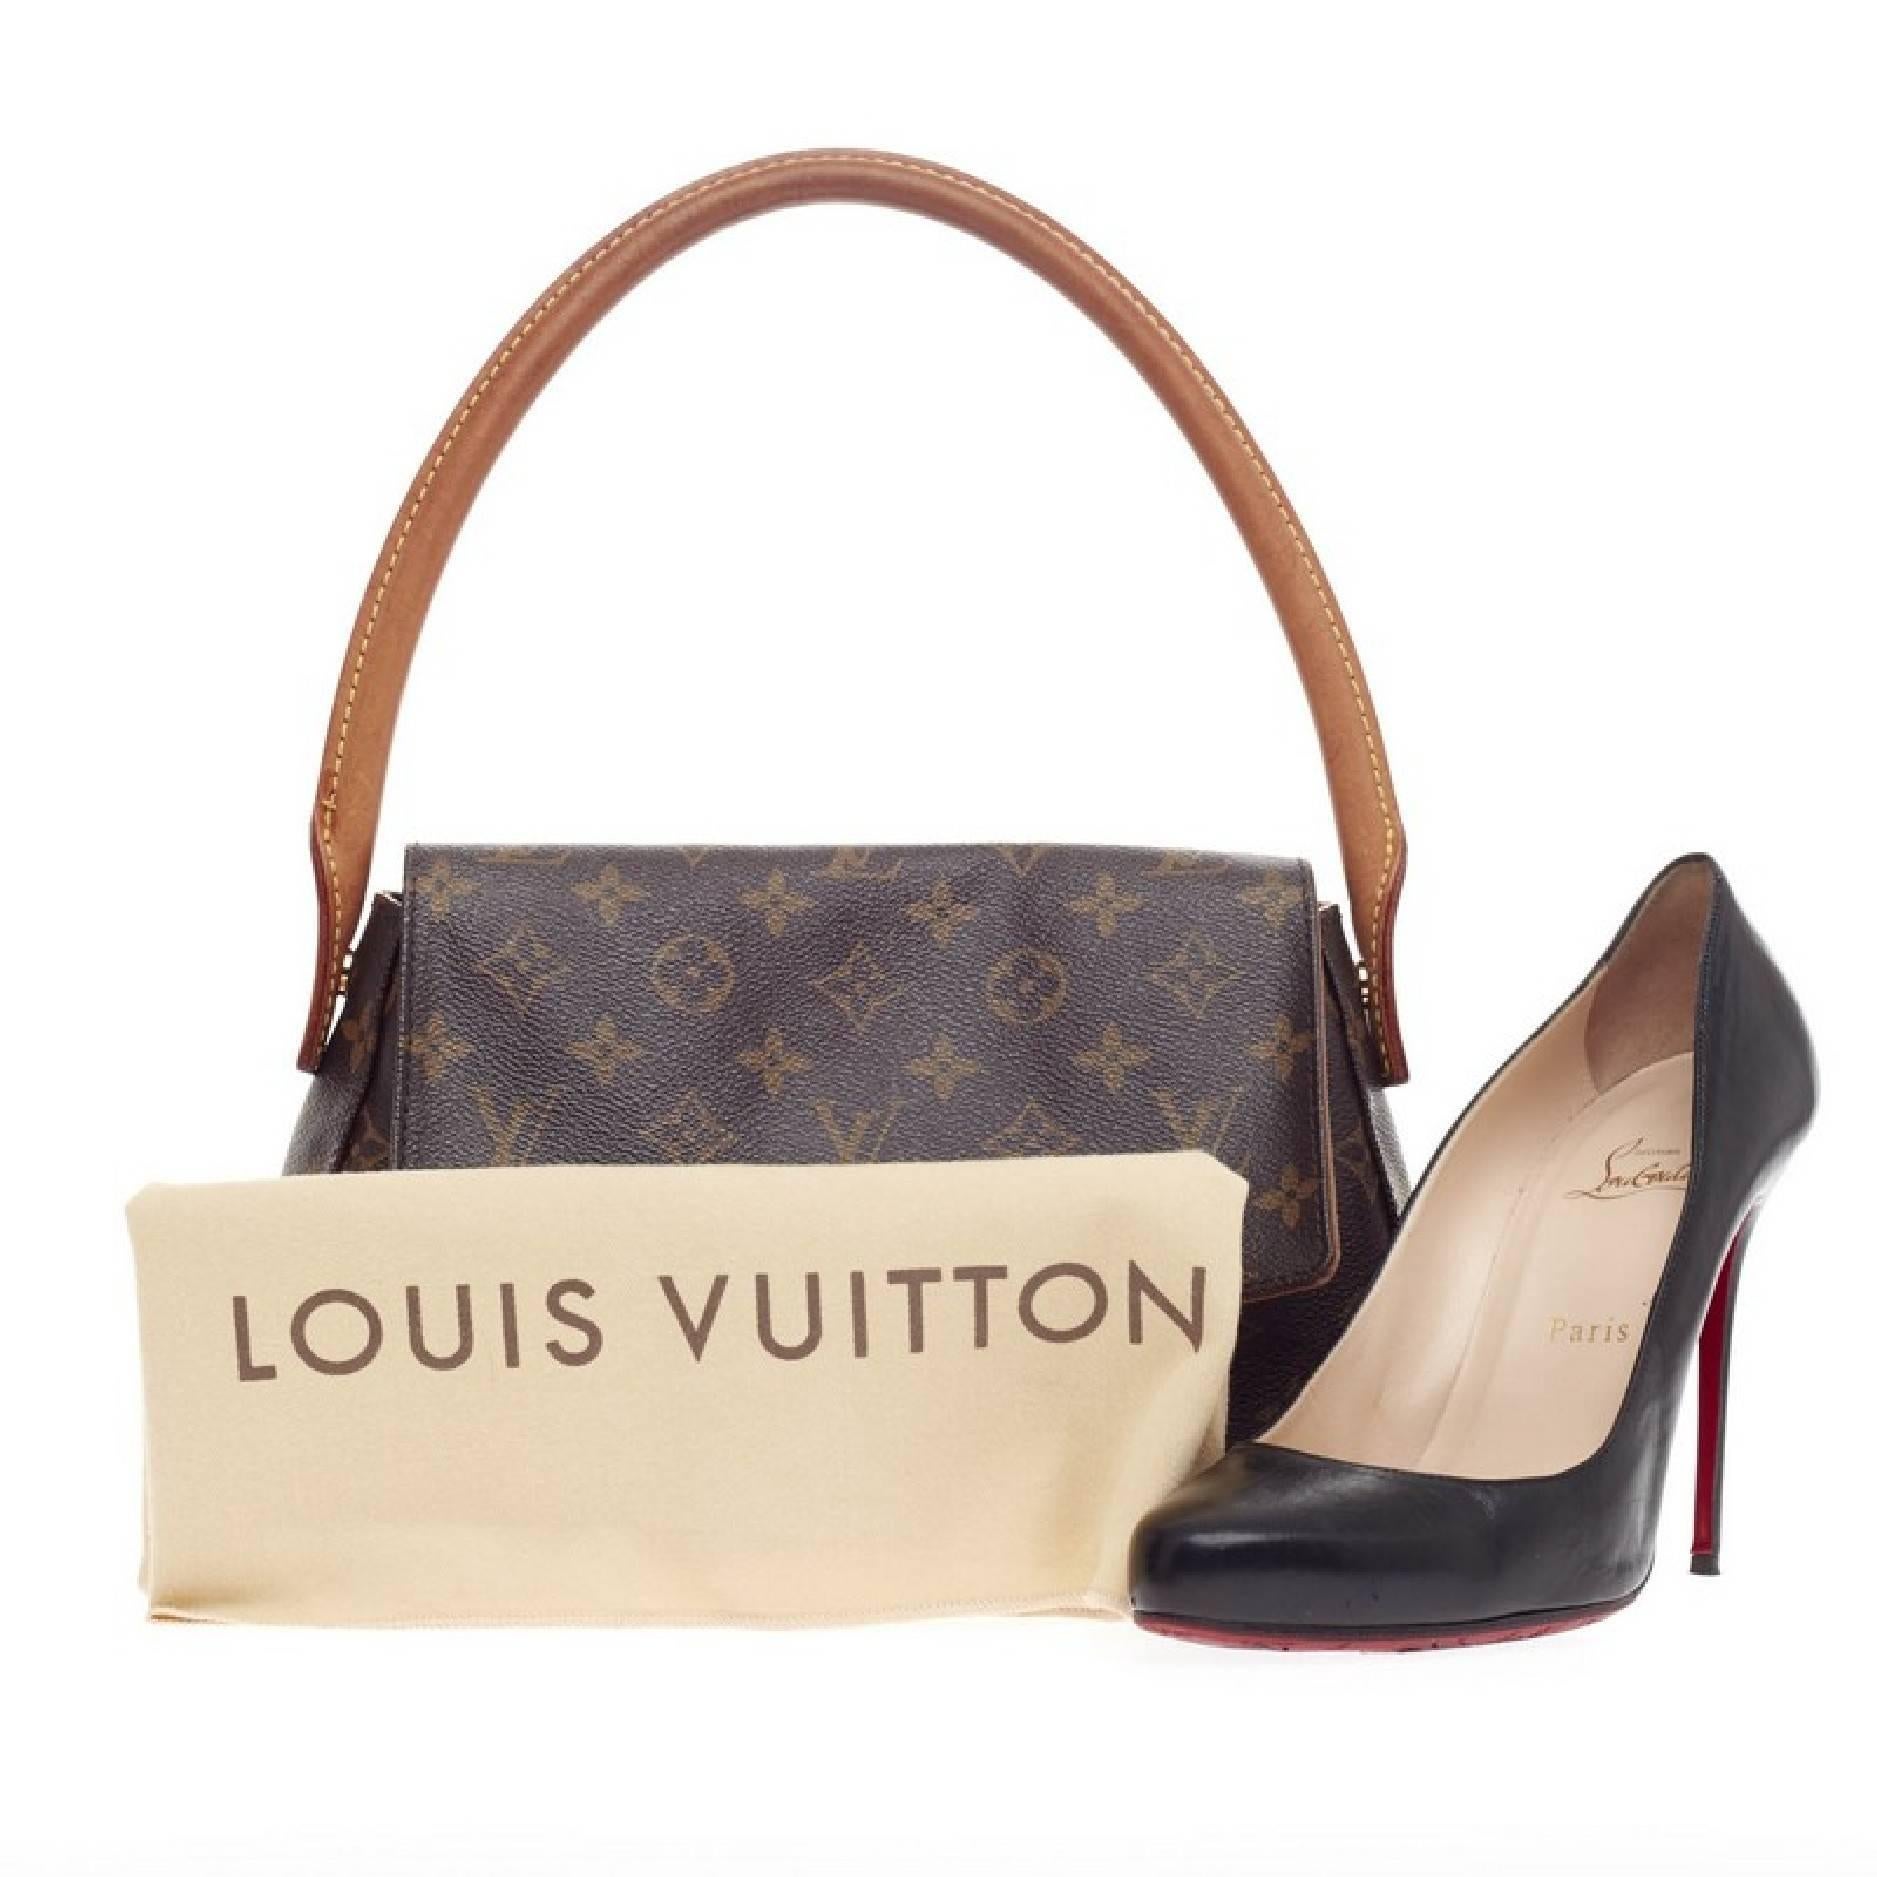 This authentic Louis Vuitton Looping Monogram Canvas Mini is sturdy in its size and showcases the brand's monogram canvas print. The smallest of the Looping collection, this bag features an arched vachetta leather handle giving the bag structure and